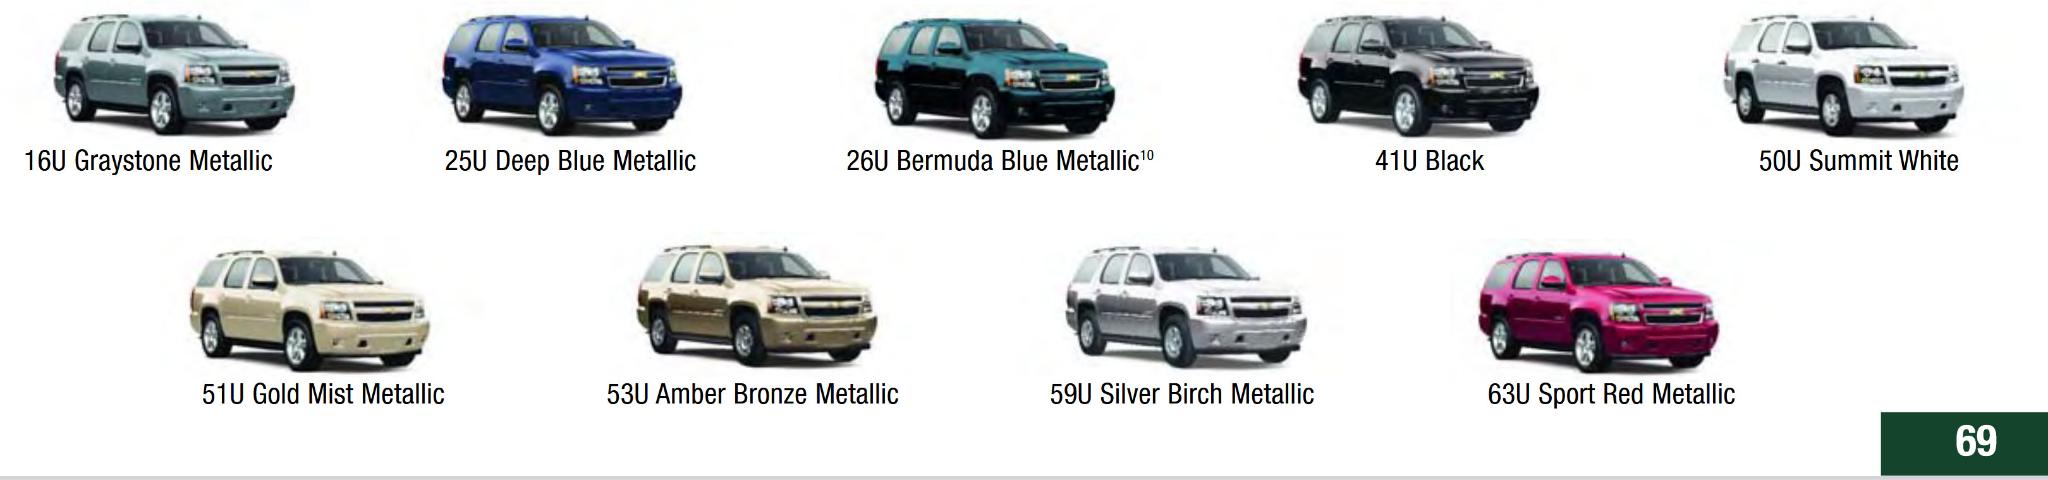 Exterior Paint Colors and Paint Codes Used on the Suburban